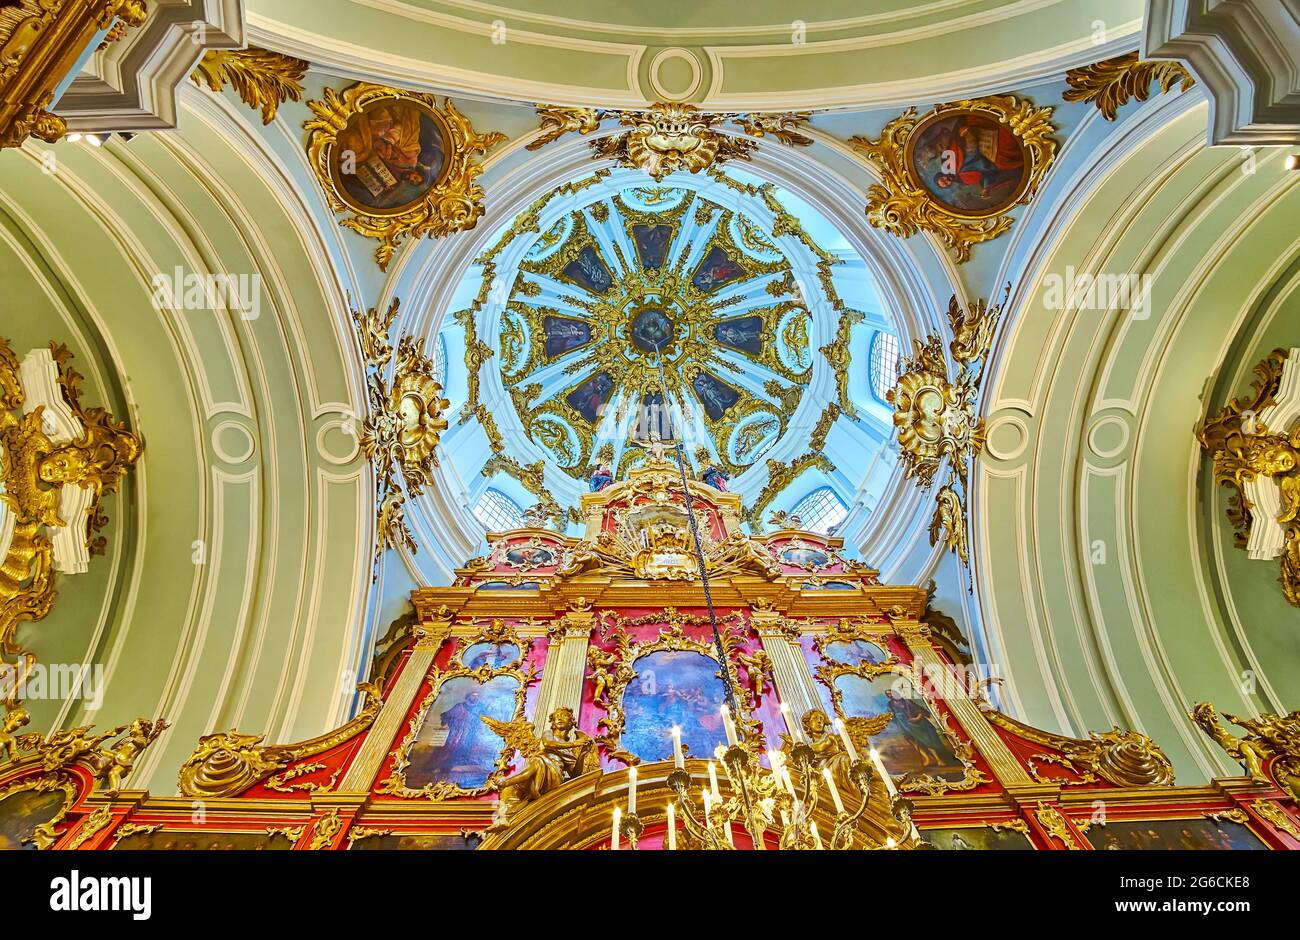 KYIV, UKRAINE - MAY 18, 2021: The ornate Baroque dome of St Andrew's Church with gilt, stucco moulding and paintings, on May 18 in Kyiv Stock Photo